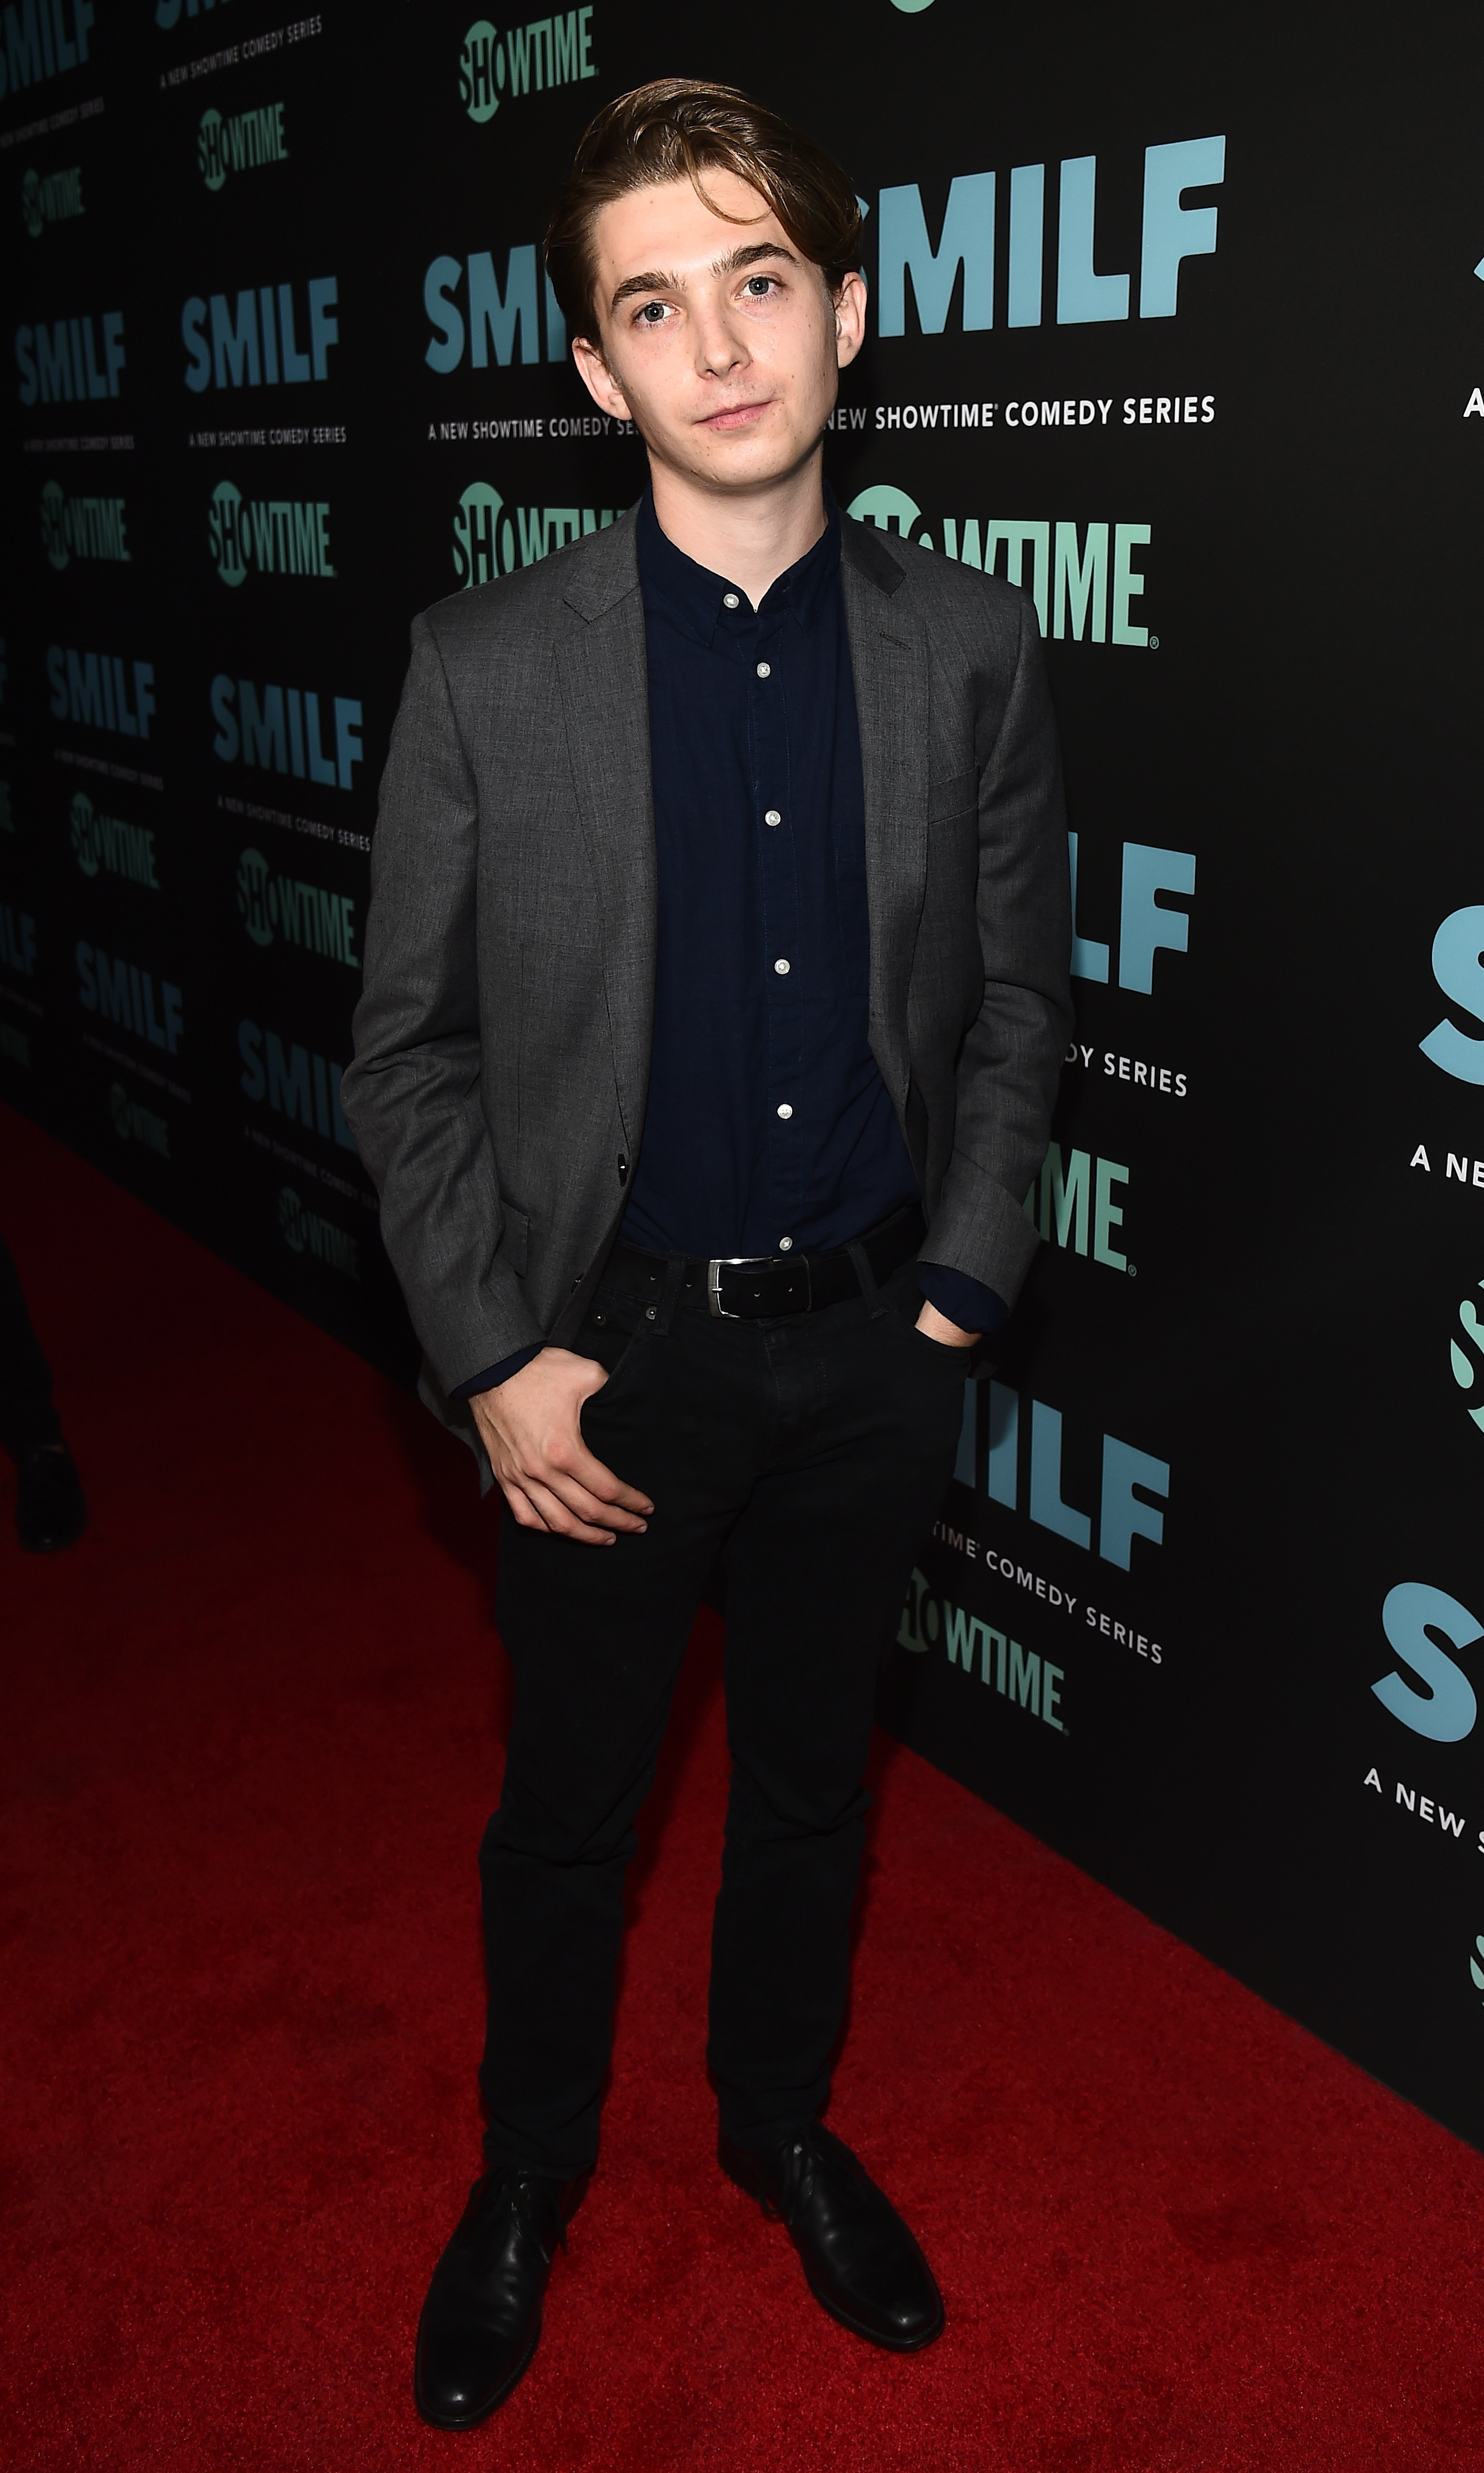 Austin Abrams at the 'SMILF' premiere in Los Angeles on October 9, 2017. │Source: Getty Images